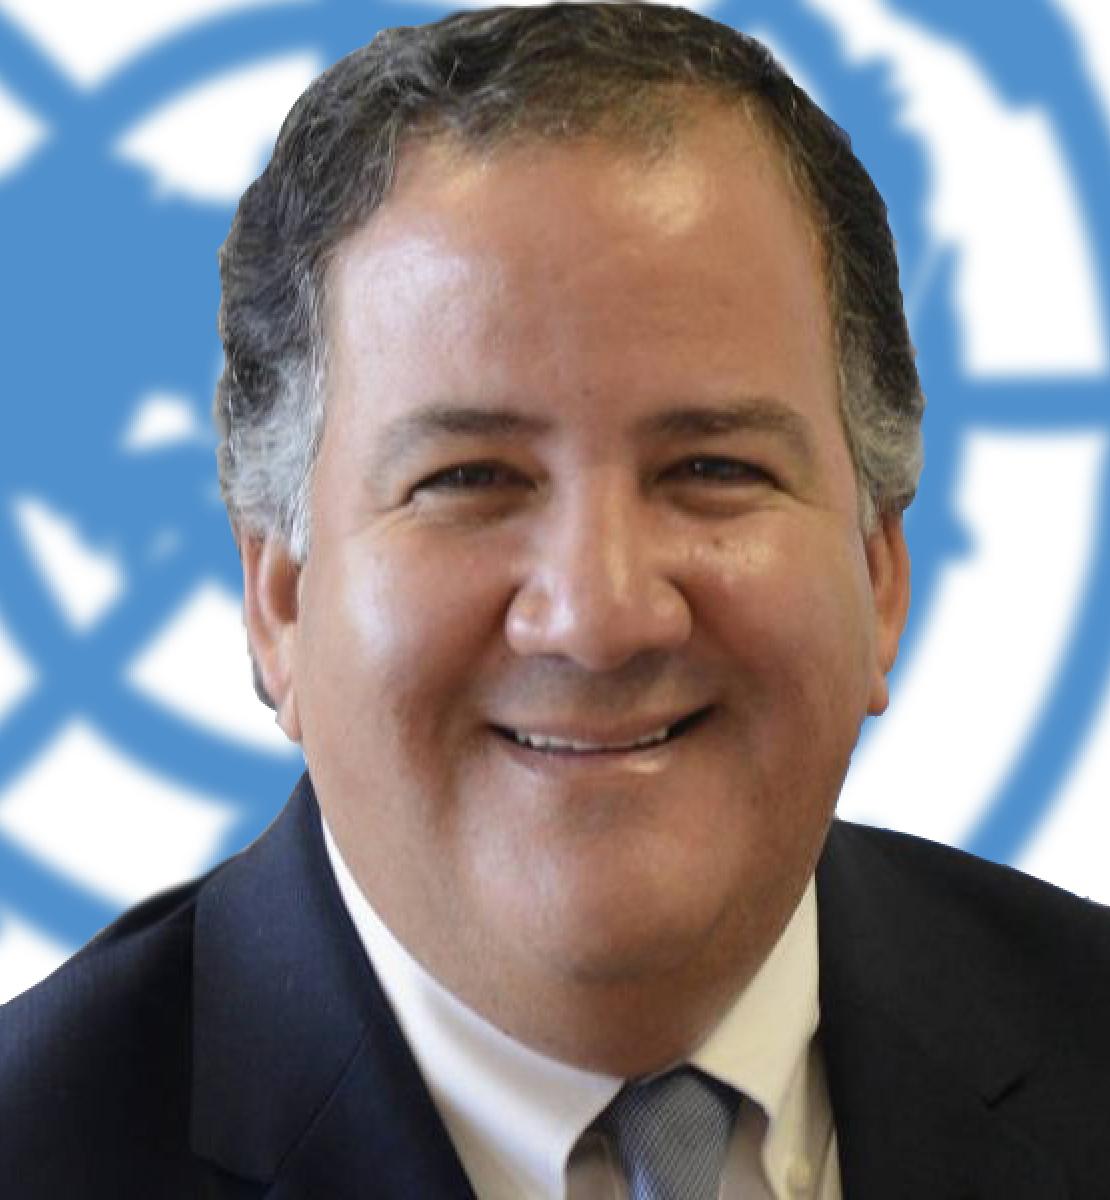 A smiling man looks straight at the camera with the United Nations Logo in the background.